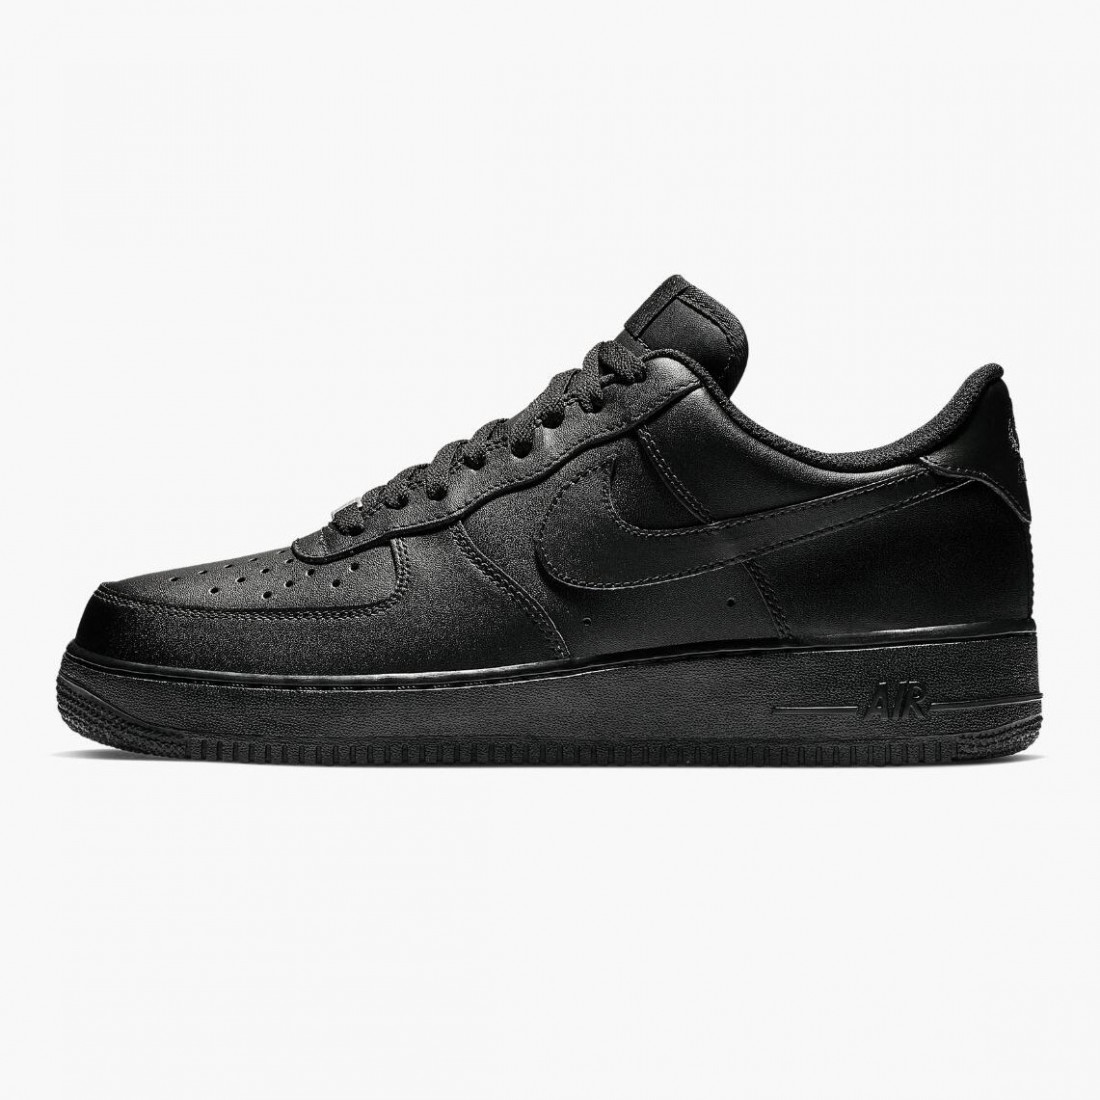 Nike Air Force 1 07 Black Black 315122 001 Unisex Casual Shoes - 315122 001